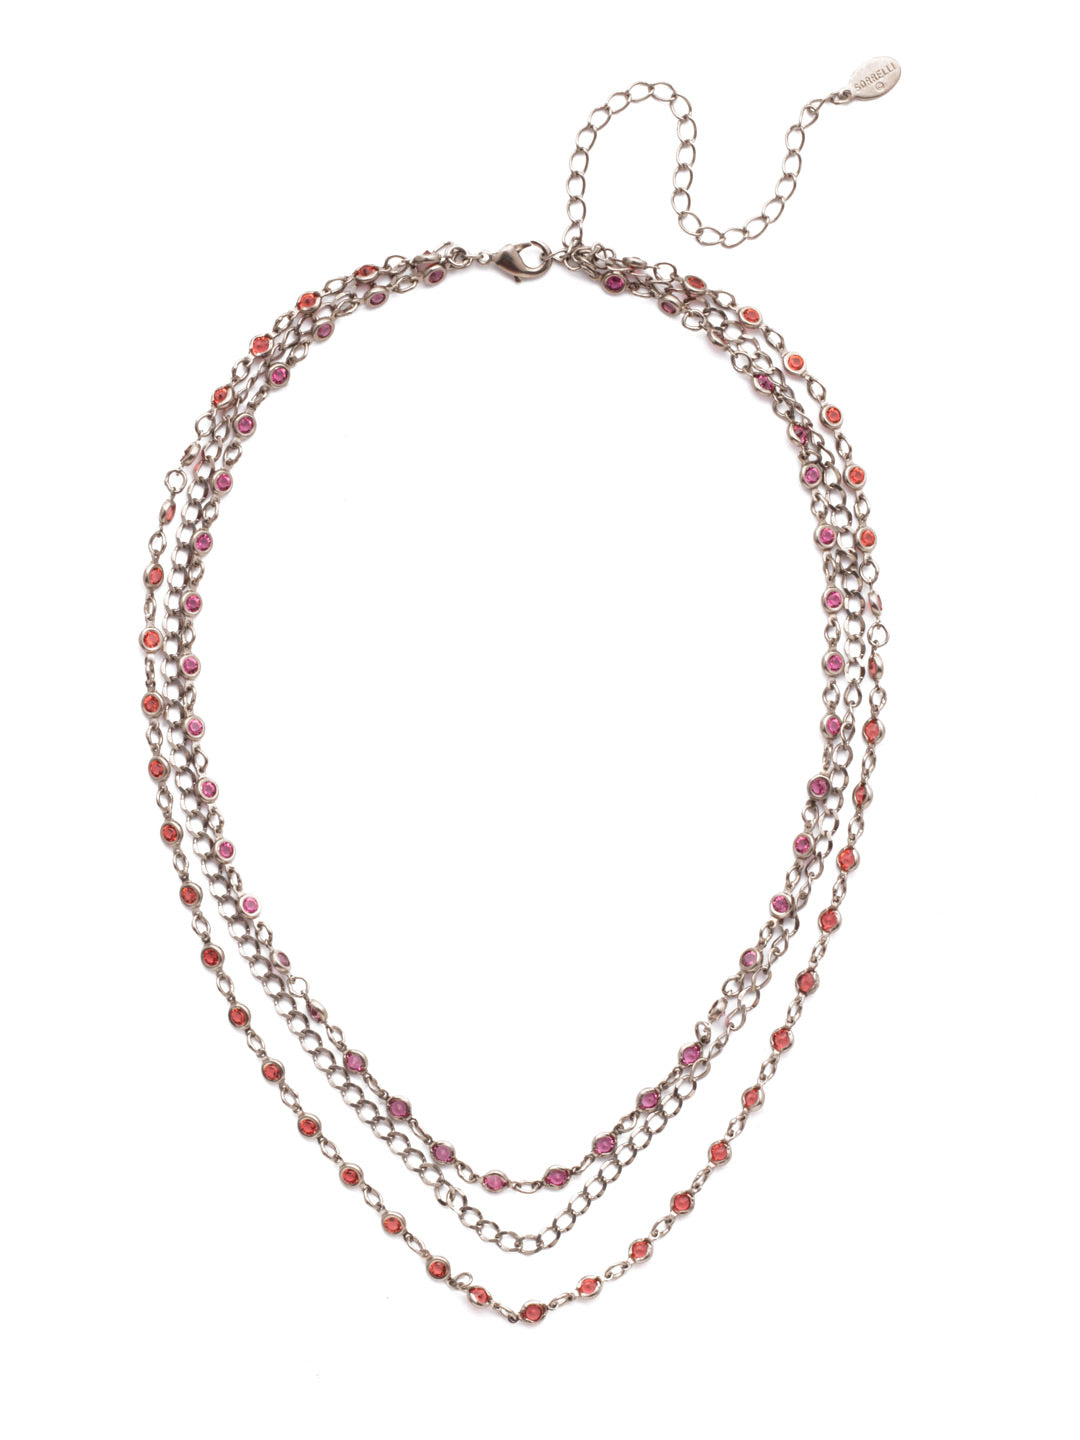 Drew Tennis Necklace - NEP91ASJF - In need of some layering? The Drew Tennis Necklace is just wat you need, with 3 strands of beautiful crystals. From Sorrelli's Juicy Fruit collection in our Antique Silver-tone finish.